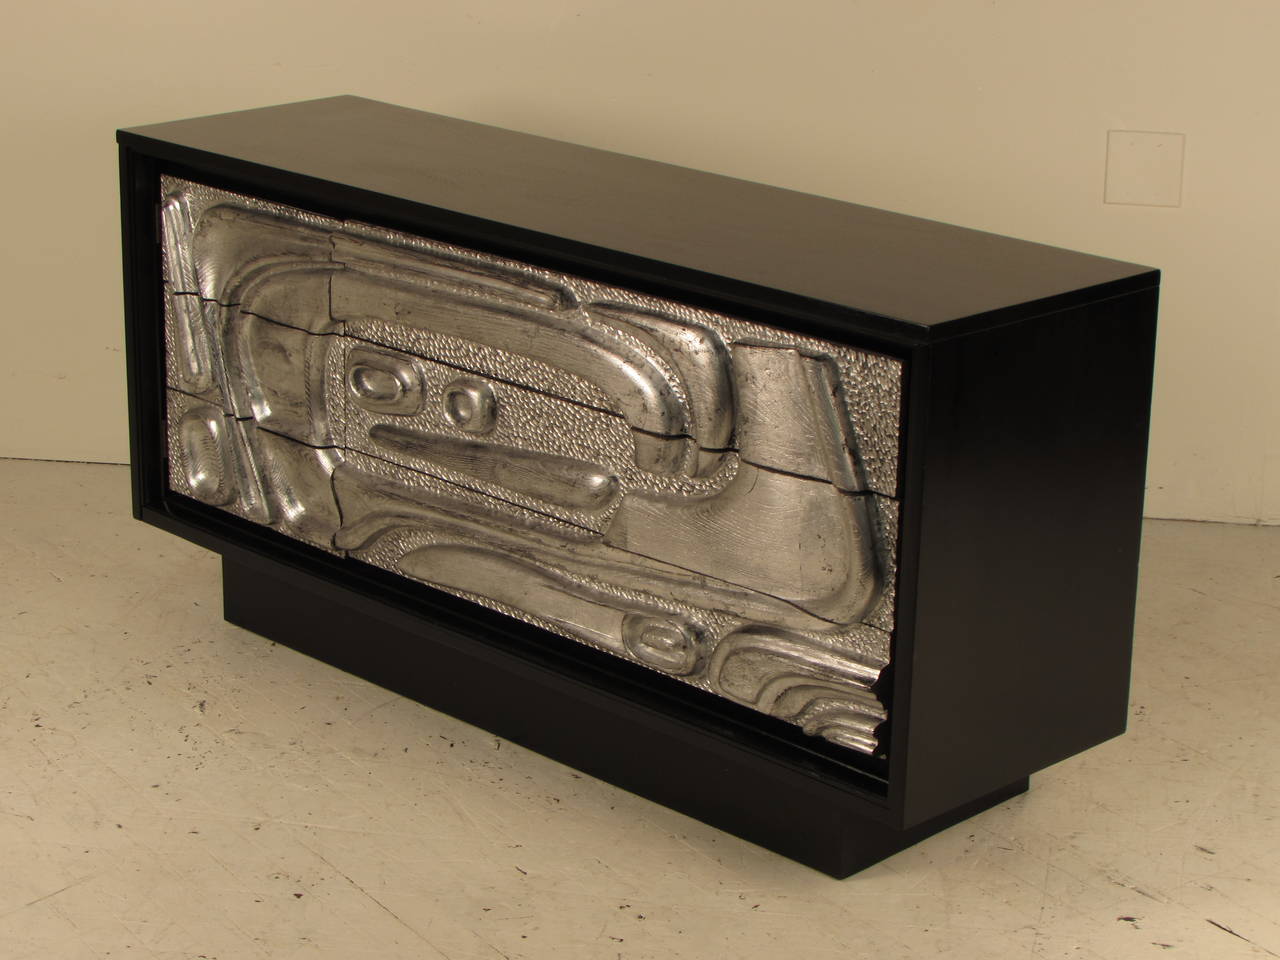 Striking sideboard with ebonized cabinet and sculptural relief front panels with silver leaf. This piece has been completely restored and is in excellent condition.